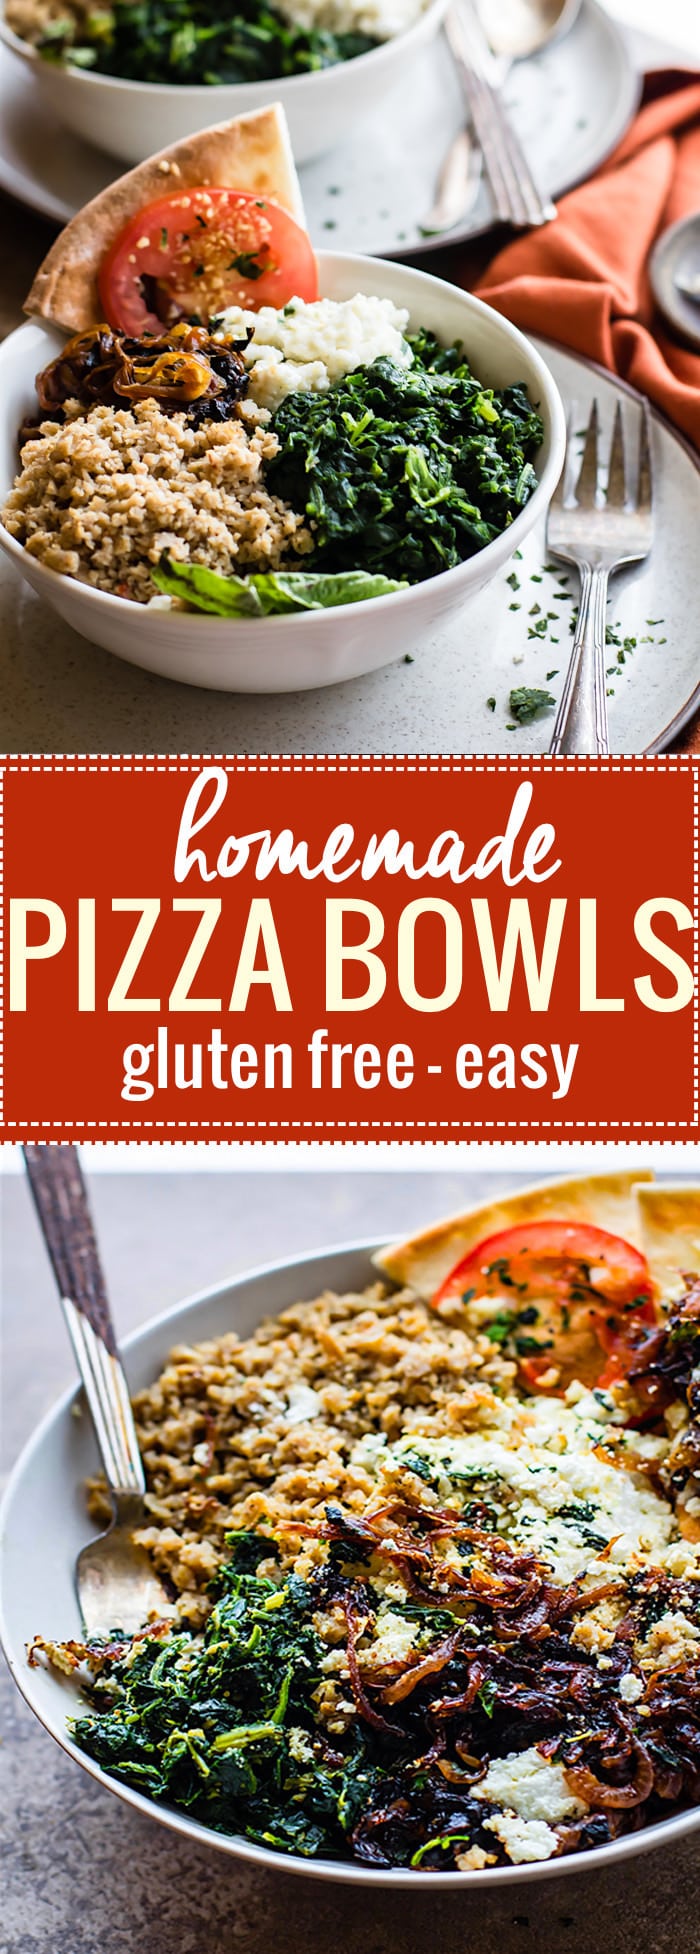 Gluten Free Homemade Pizza Bowls! These Easy homemade Pizza Bowls are a super fun way to share and customize pizza. Just fill it with all your favorite gourmet pizza toppings! Caramelized onion, goat cheese, spinach, and more. Healthy, easy, delish!! www.cottercrunch.com @cottercrunch.